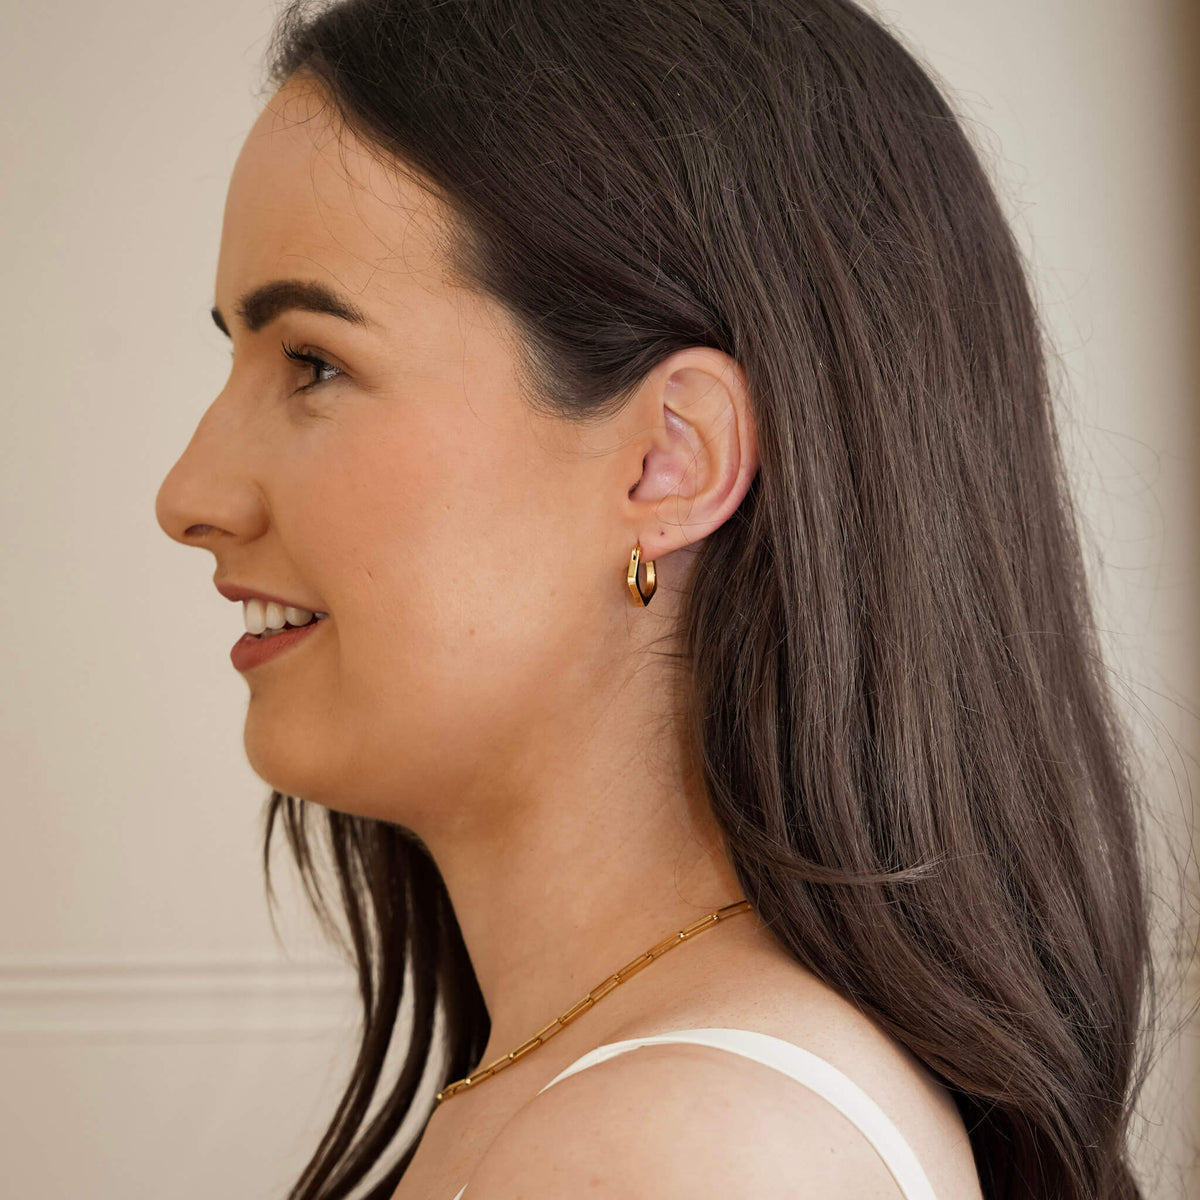 best selling earrings from Mettle & Bloom. These urbane hoop earrings have an angled design that is both contemporary and timeless. They have a hinge clasp and they are lightweight. 